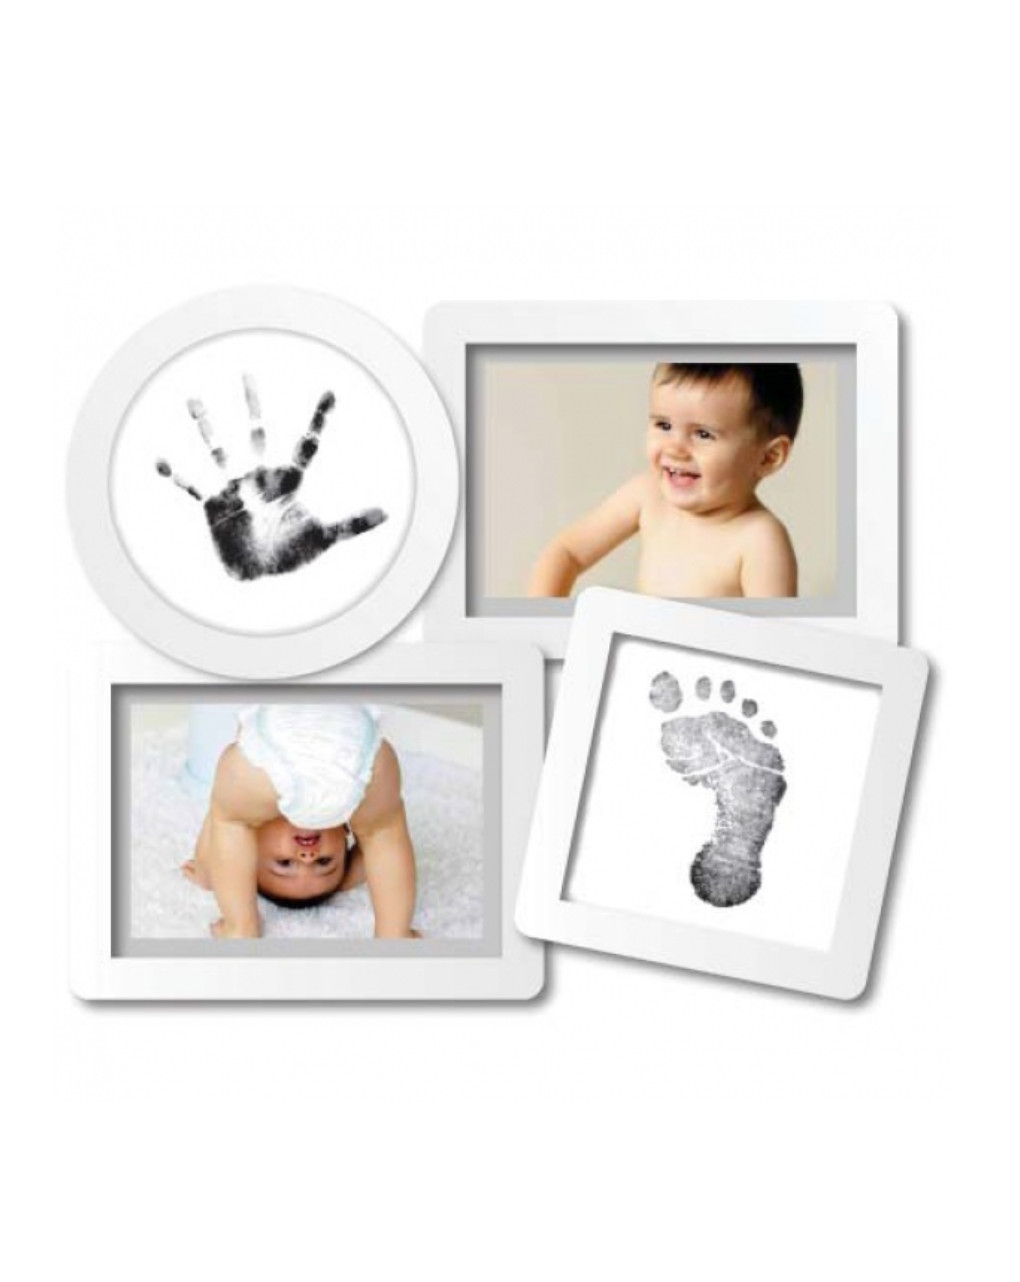 Babyprints collage frame - Pearhead